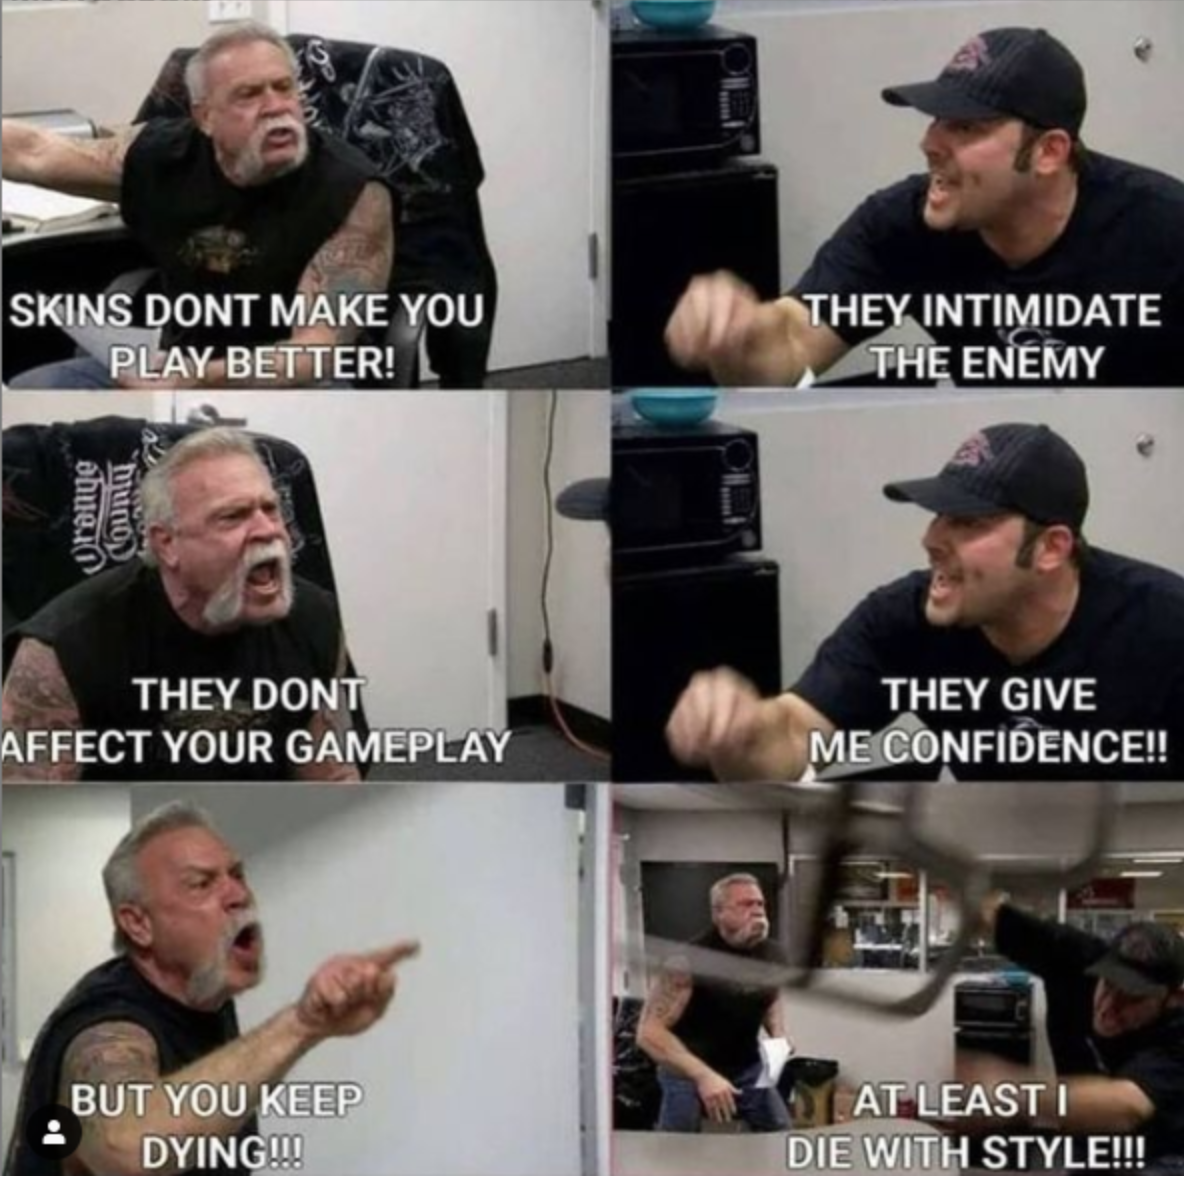 funny gaming memes - american chopper meme template - Skins Dont Make You Play Better! They Intimidate The Enemy ohuelo Od They Dont Affect Your Gameplay They Give Me Confidence!! But You Keep Dying!!! At Leasti Die With Style!!!